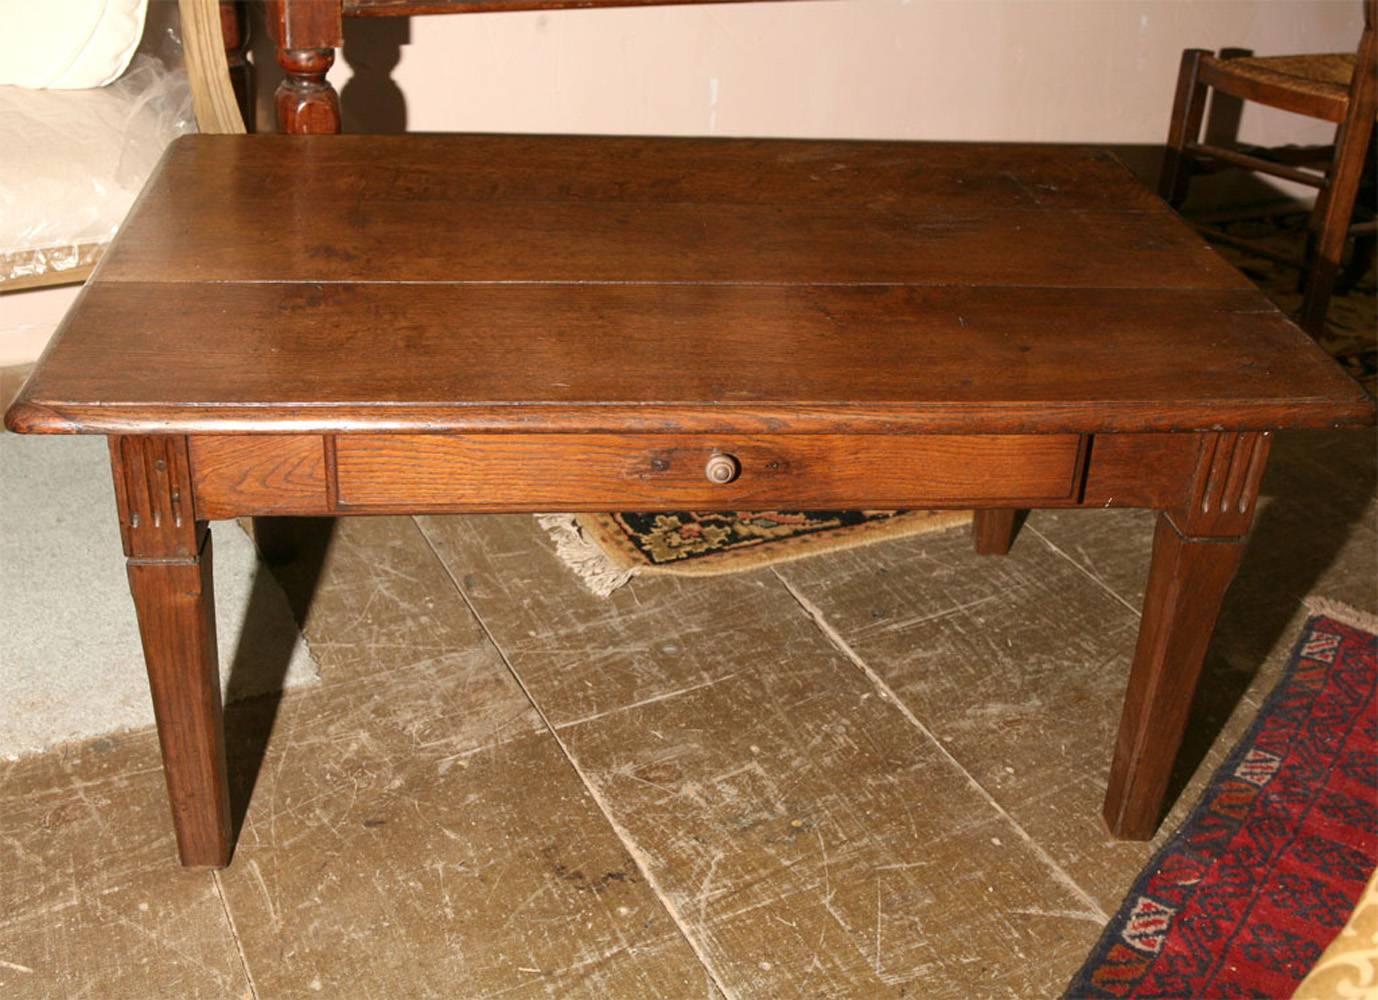 Rustic French country style rectangular cocktail table with plank top, four tapered legs and one facing drawer. Great aged patina and character.